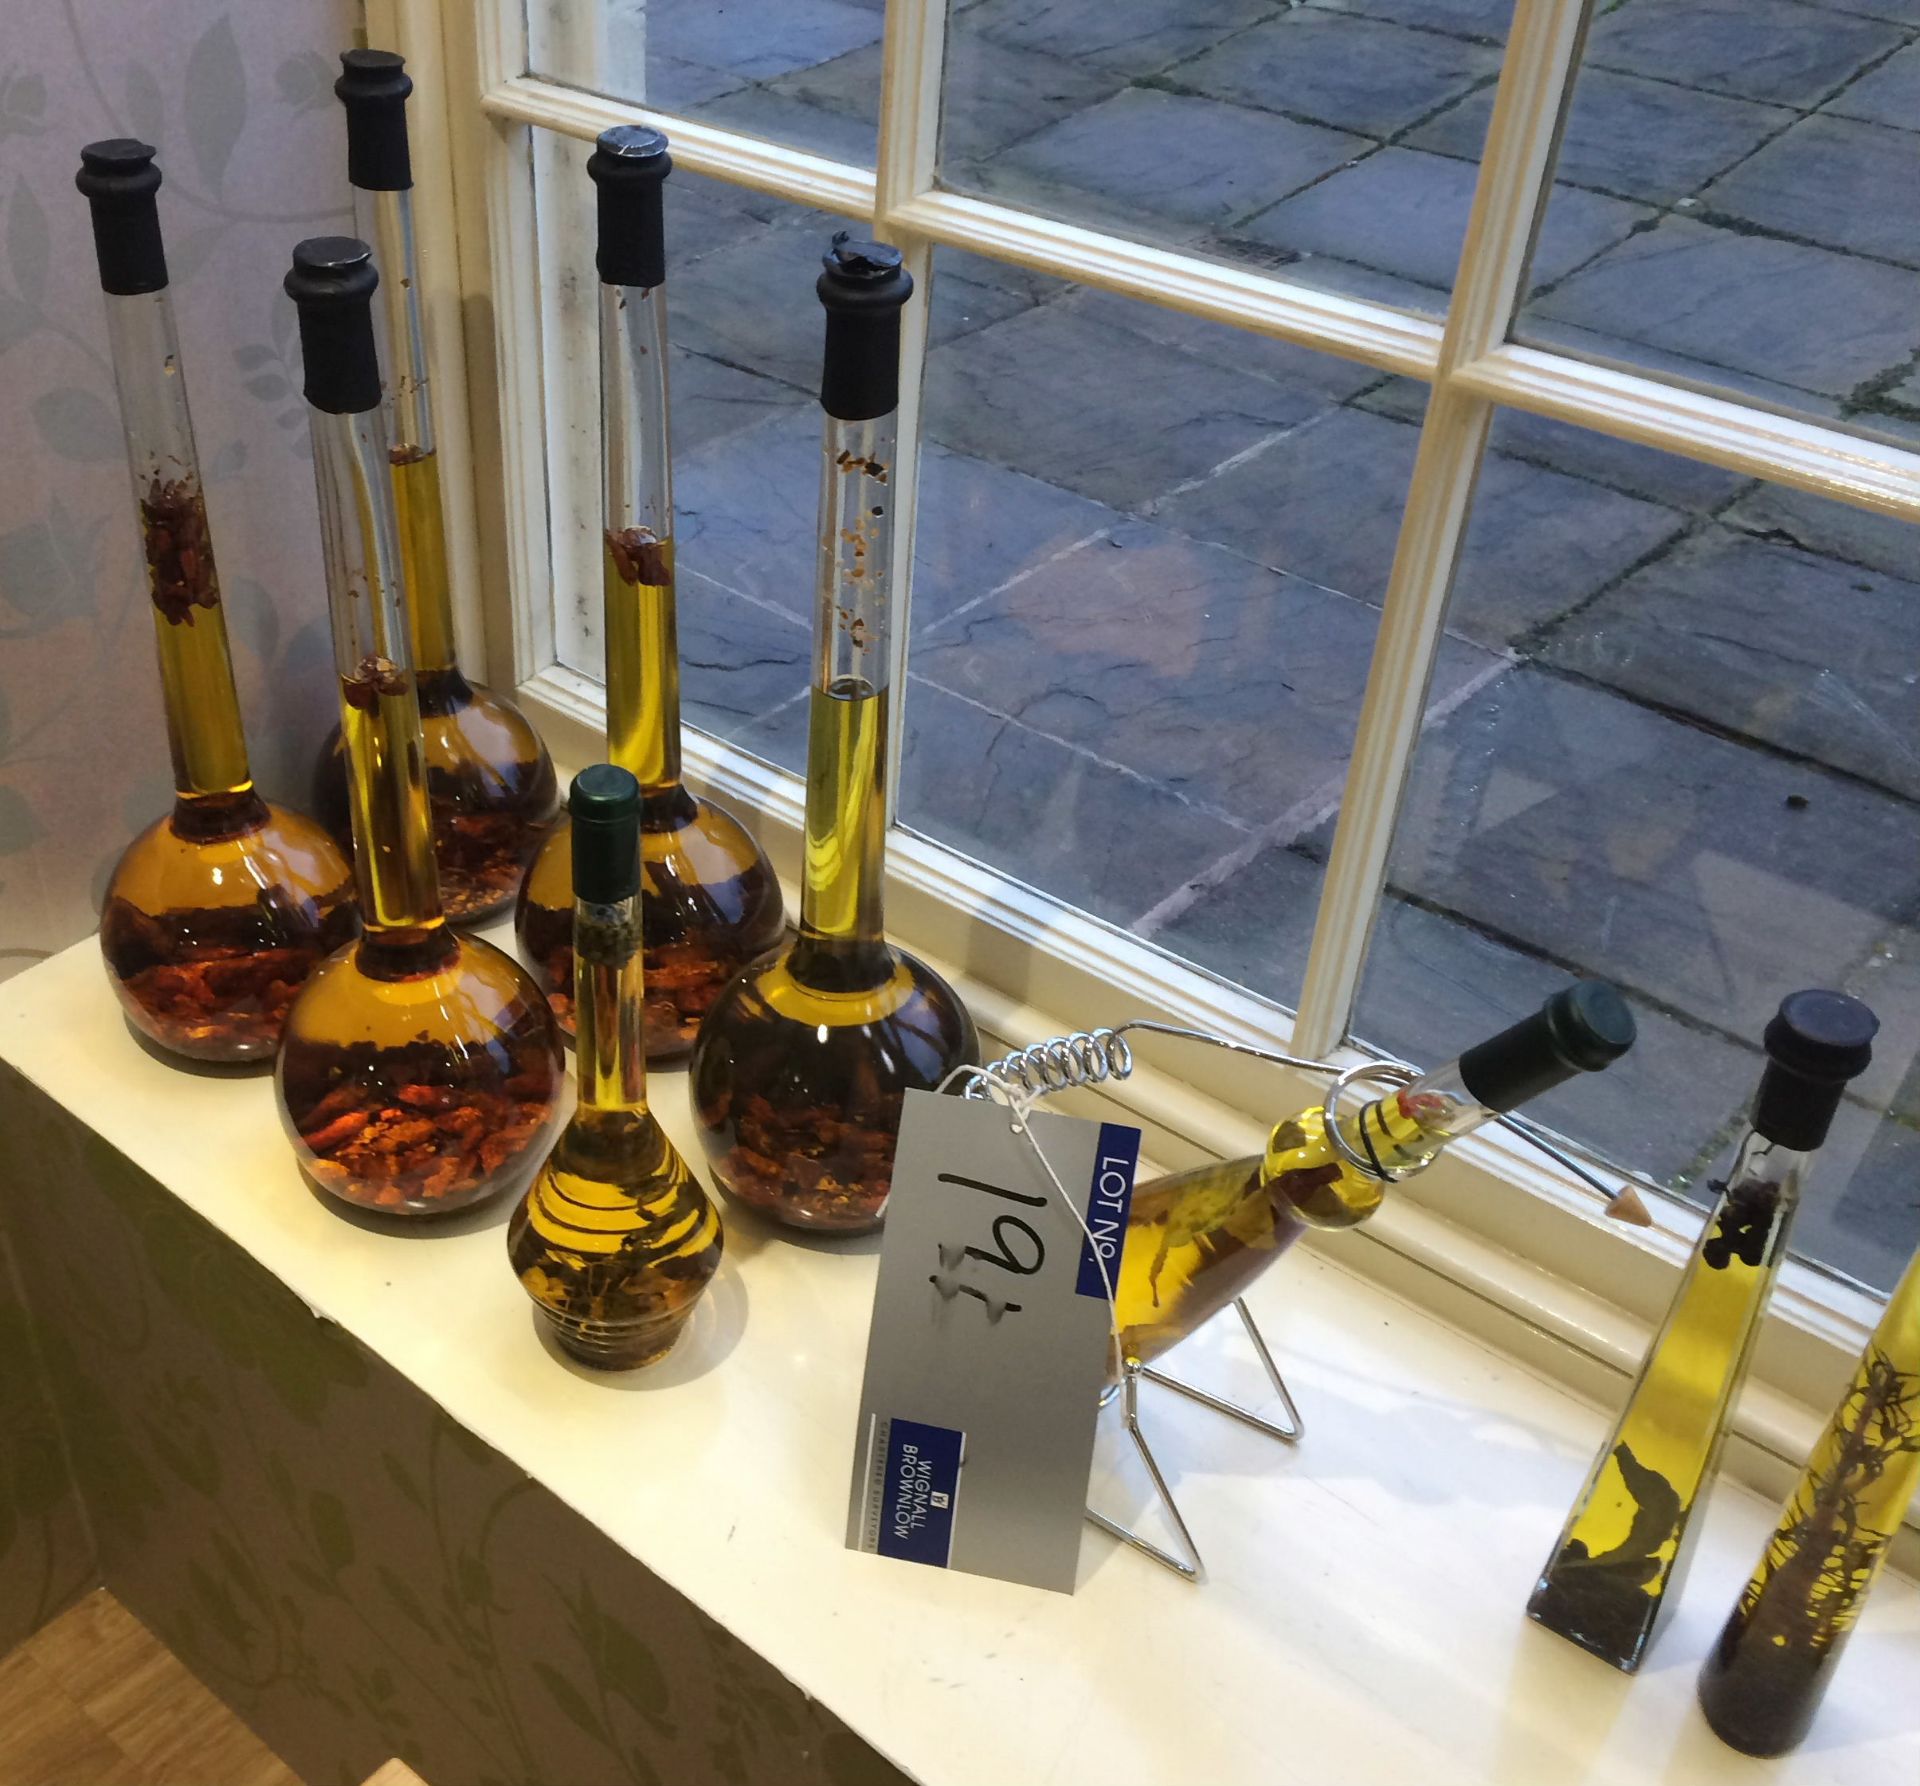 16 Assorted Display Bottles of Flavoured Olive Oil; 3 Matching Sets of Olive Oil and Balsamic - Image 2 of 4